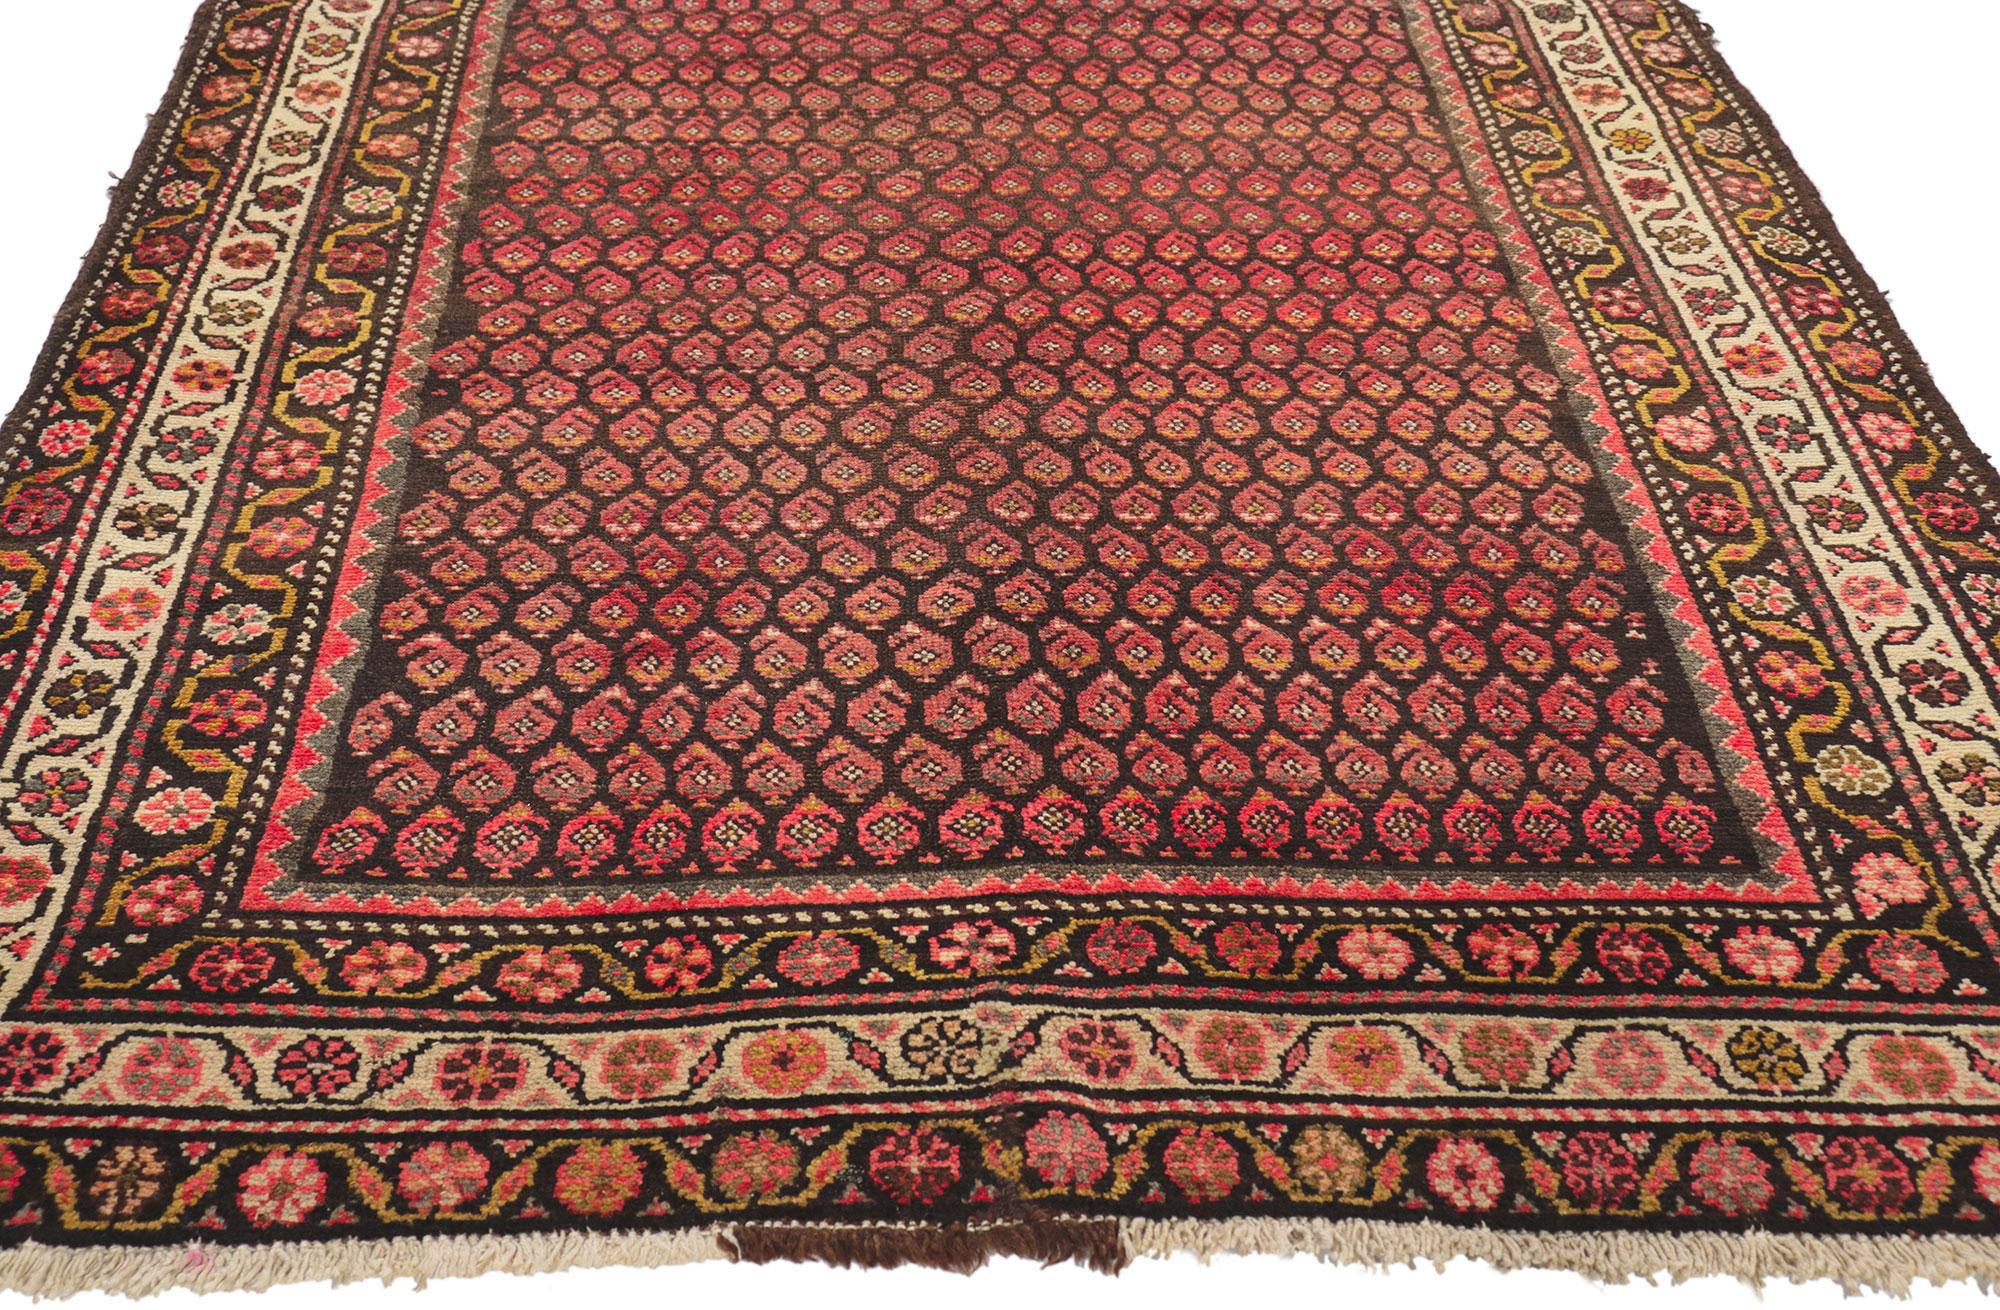 Earth-Tone Vintage Persian Malayer Rug Runner In Good Condition For Sale In Dallas, TX